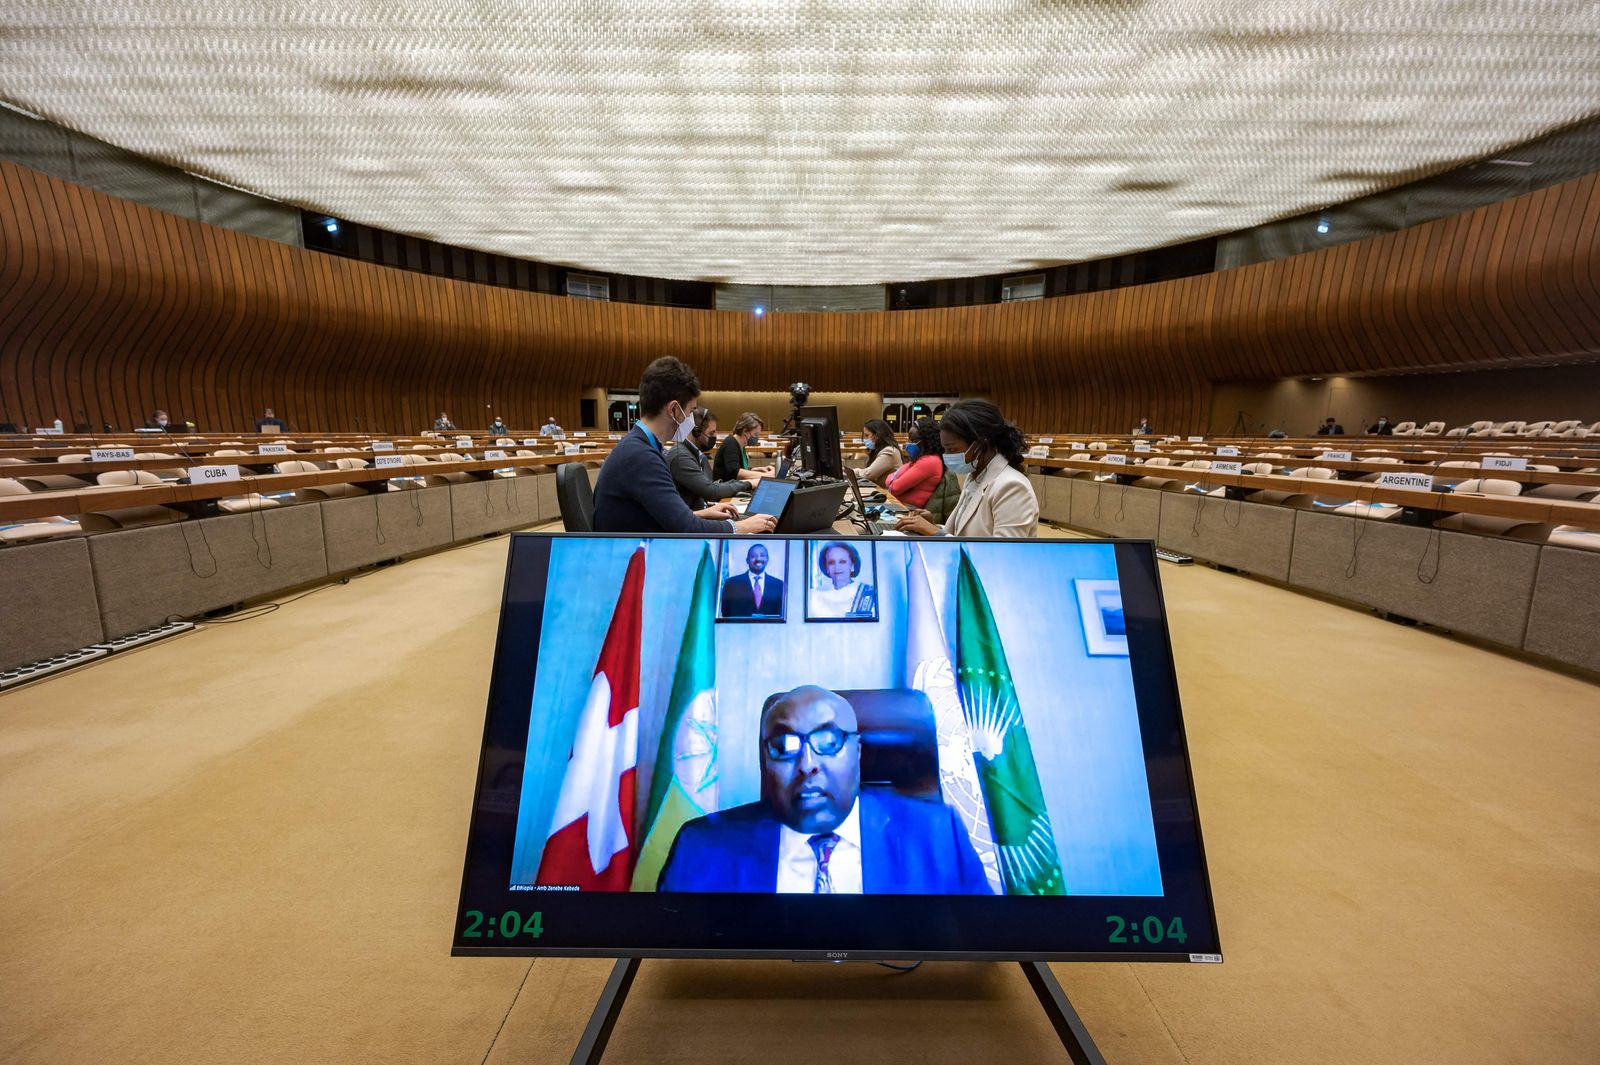 Ambassador and Permanent Representative of Ethiopia to the UN Zenebe Kebede (on screen) delivers a speech remotely during an extraordinary meeting on Ethiopia at the United Nations (UN) Human Rights Council in Geneva on December 17, 2021. - The United Nations warned that all sides in Ethiopia's 13-month conflict were committing severe abuses, and cautioned that generalised violence could ensue, with implications for the entire region. (Photo by Fabrice COFFRINI / AFP) - AFP